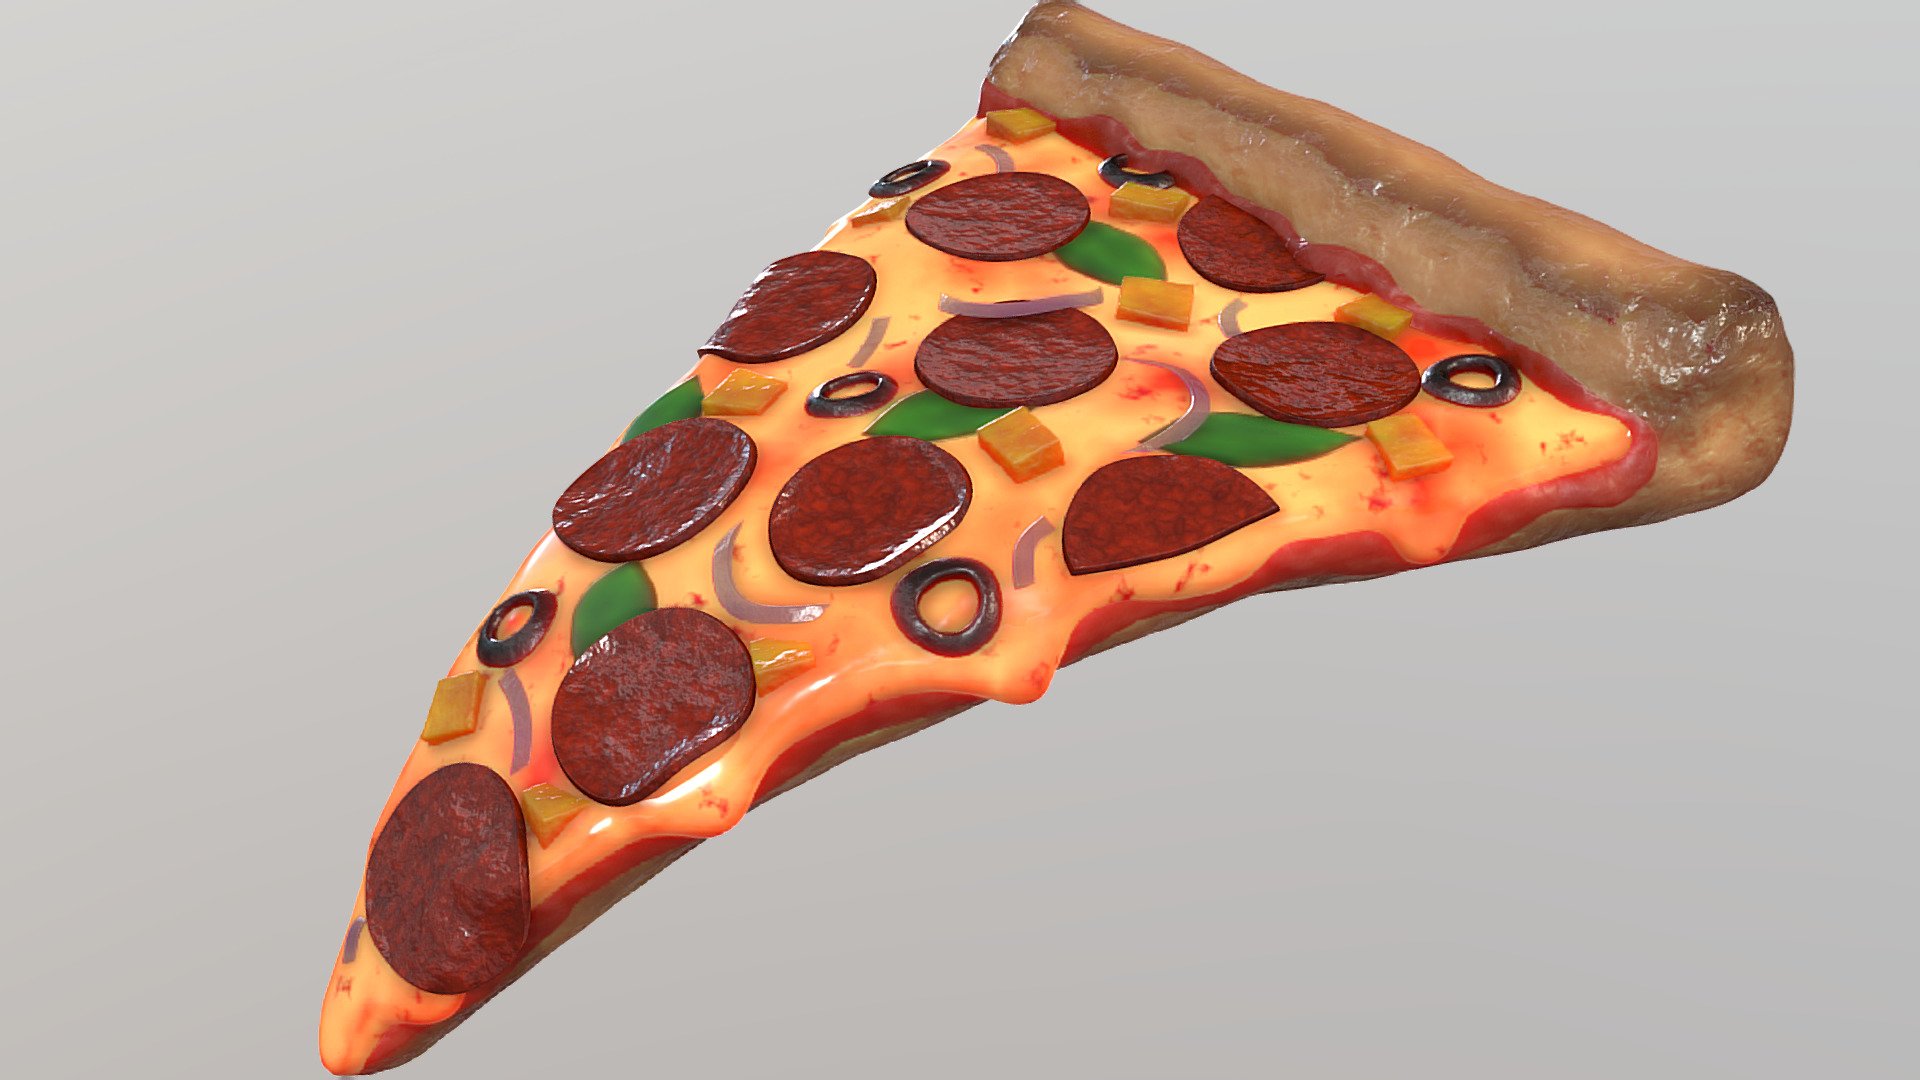 Pizza Slice, created with Blender. This is the tutorial result of my Pizza Slice Blender Tutorial Series.
Watch the tutorial here:  https://youtu.be/ibci0no9IME

When pucrchased, you will get a zip file, containing two folders. One folder has the original project files, and the other folder has the Sketchfab version. The version created for Sketchfab has baked textures, and the sculpted objects have lower topology.

Contents when purchased:


Pizza Blender File
All baked texture maps
HDRI Lighting
Basil Texture
Final Render
Pizza FBX File
 - Pizza Slice 🍕 - Buy Royalty Free 3D model by Ryan King Art (@ryankingart) 3d model